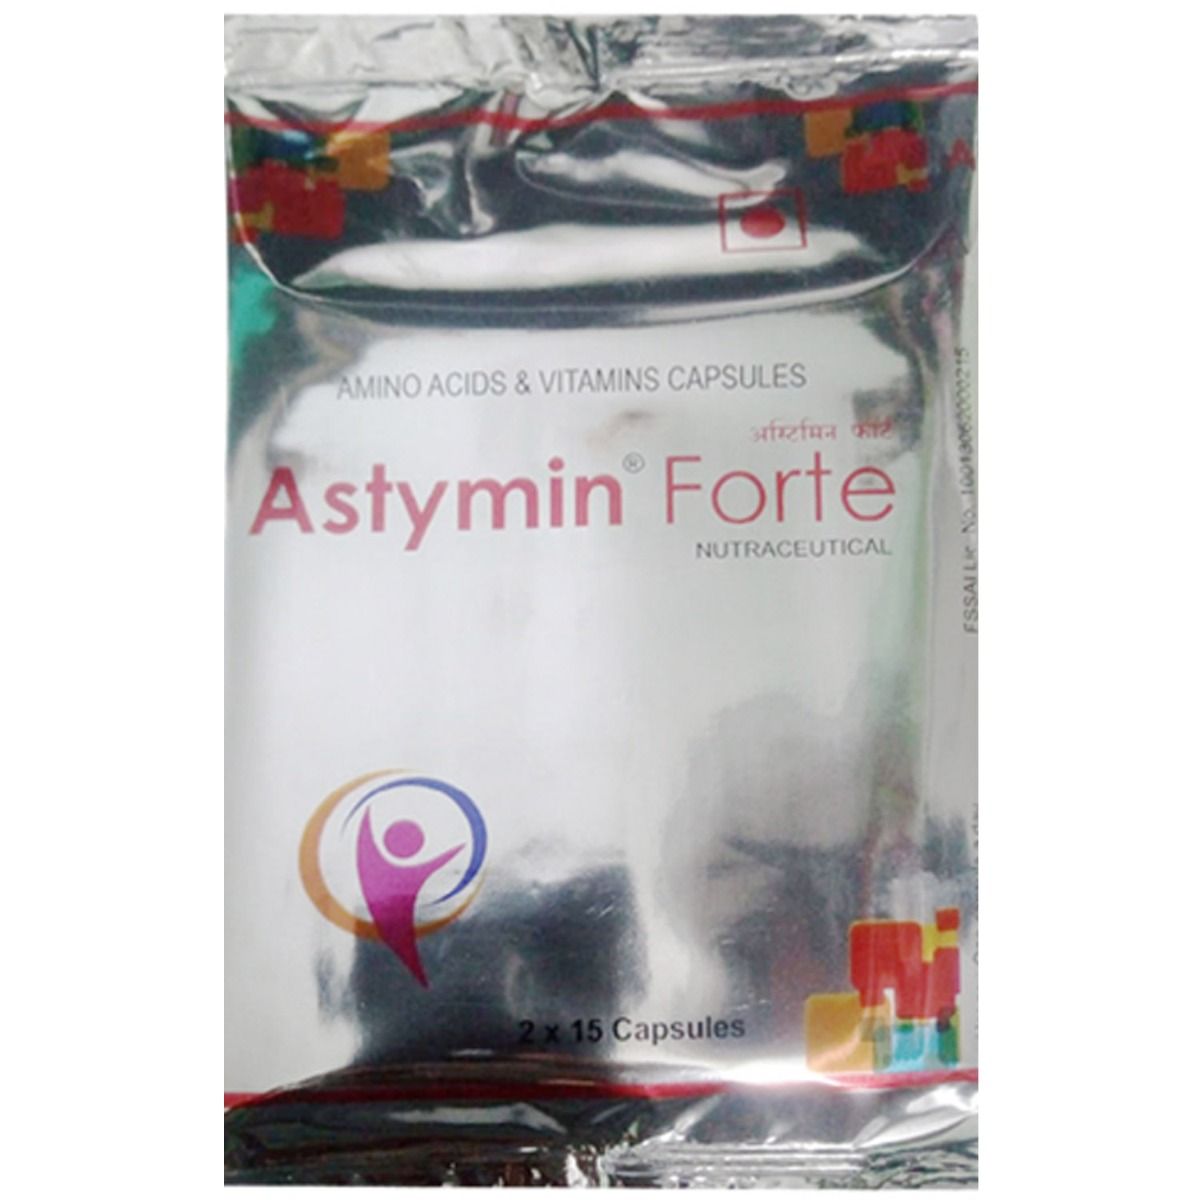 Astymin Forte Capsule (2X15) 30'S Price, Uses, Side Effects ...